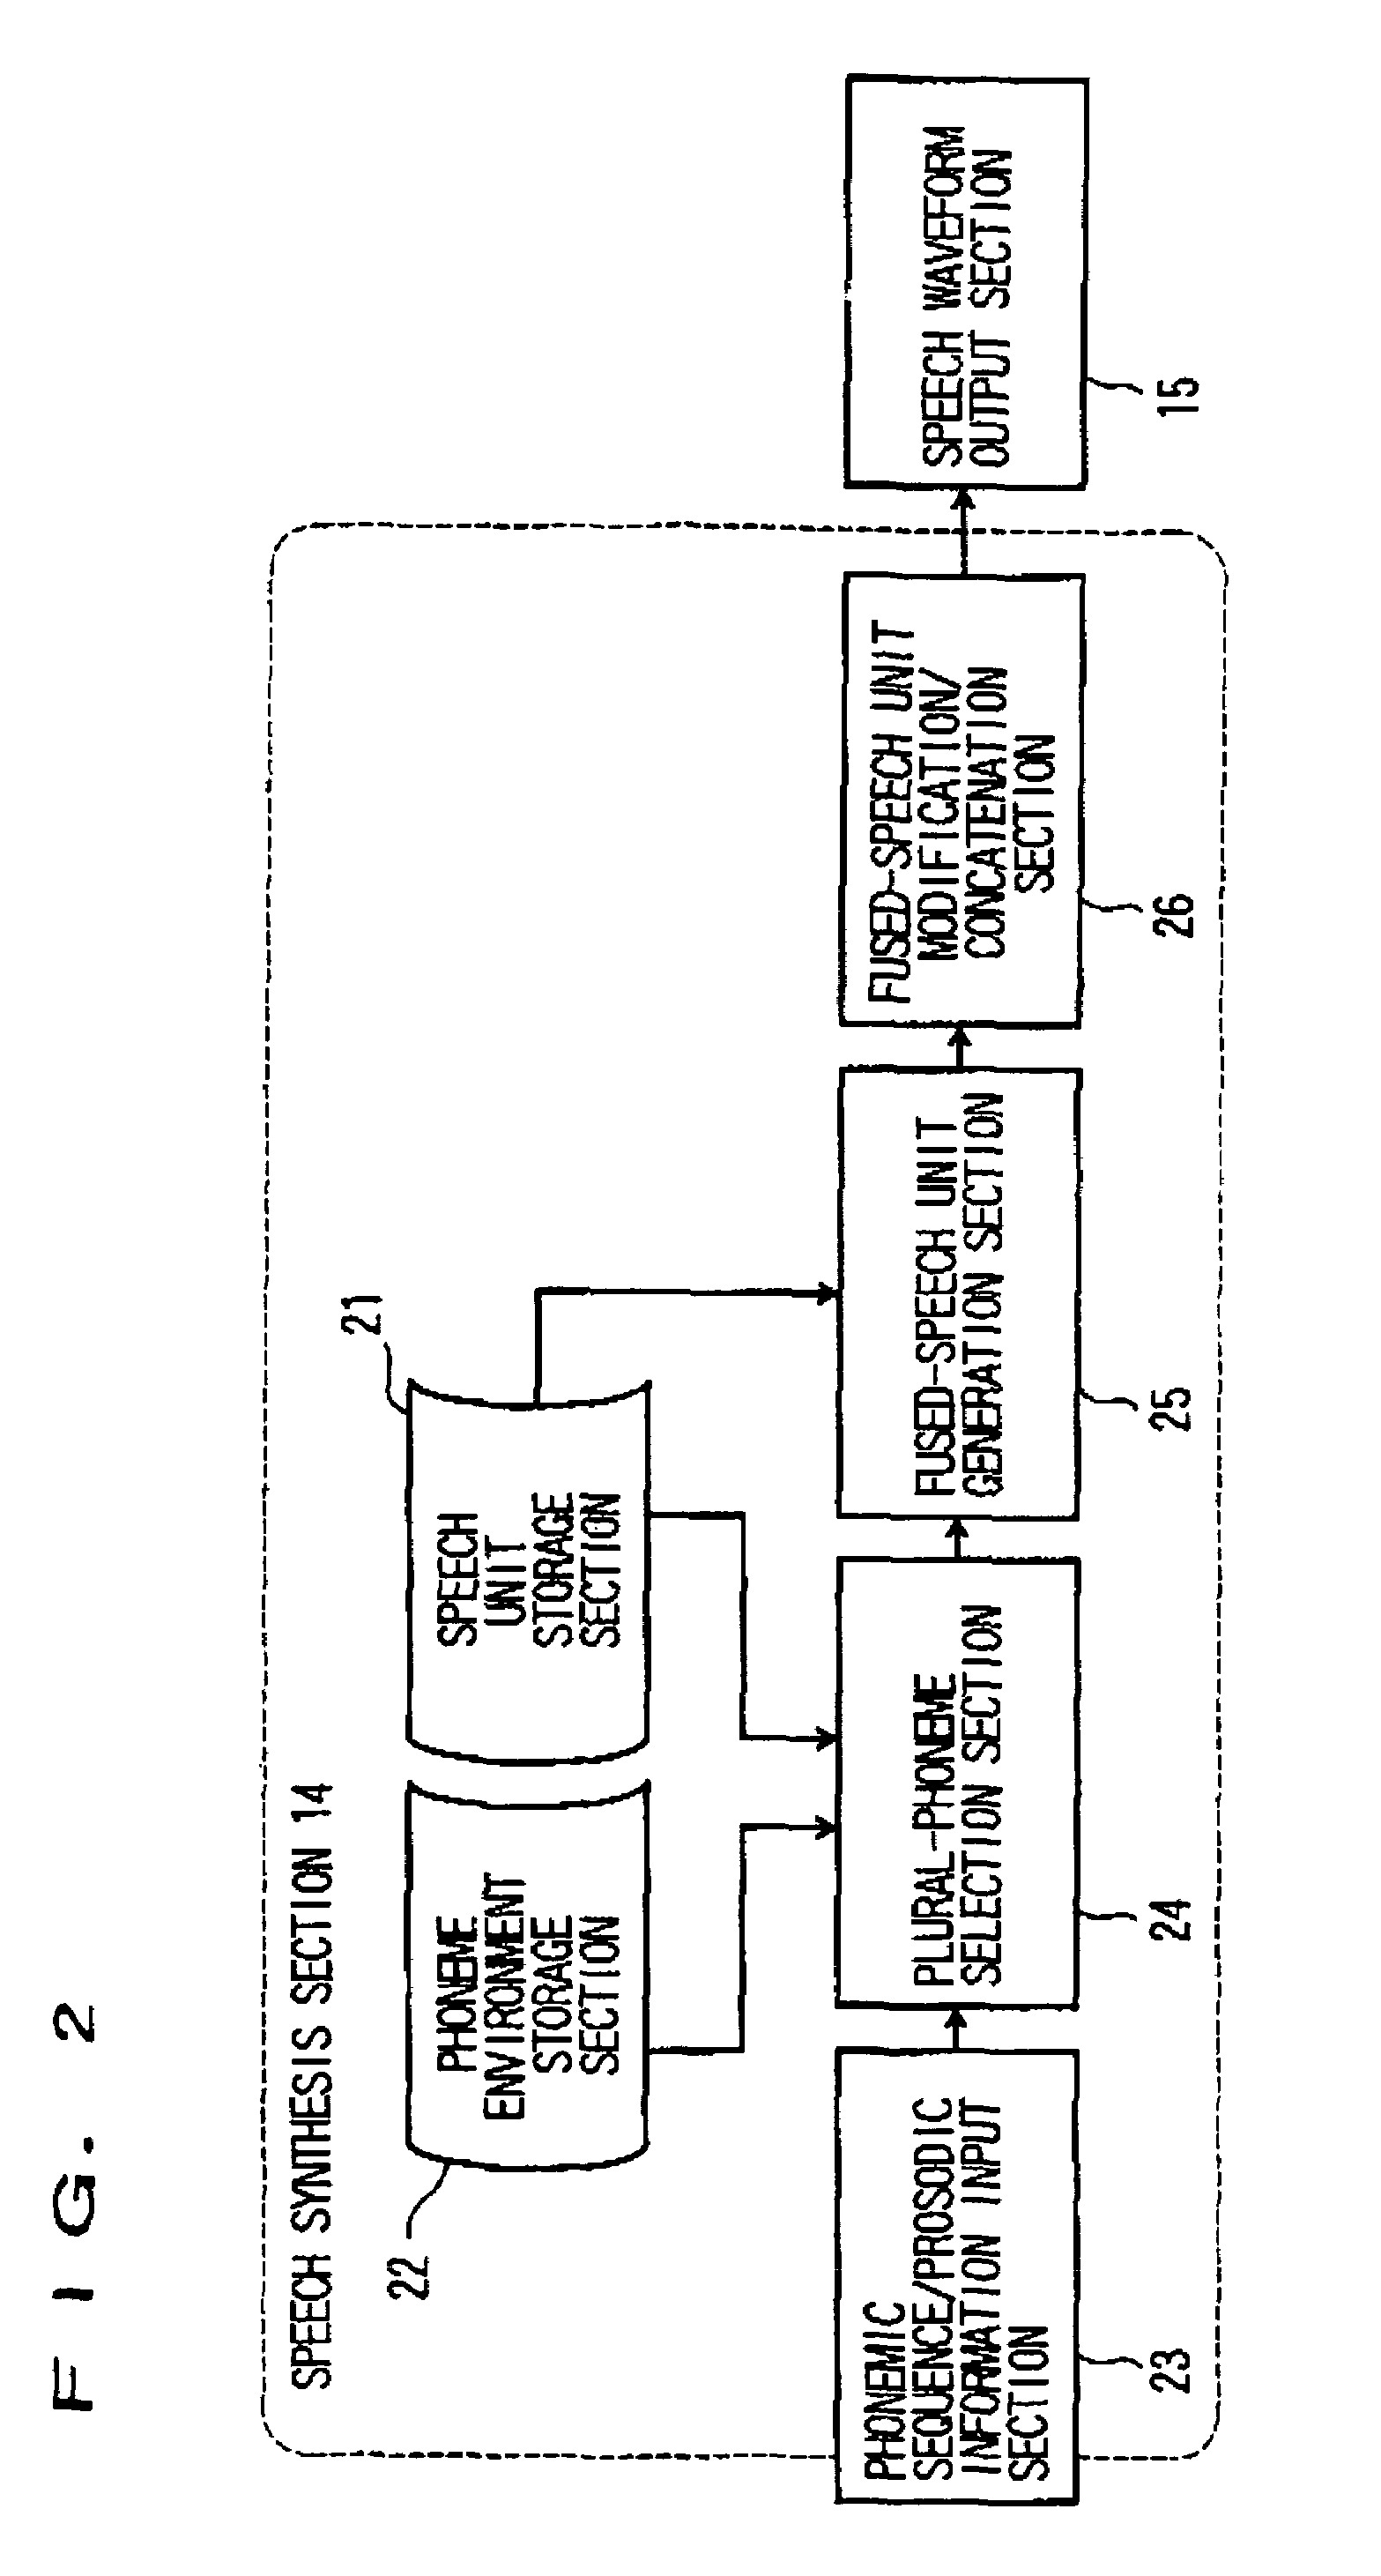 Speech synthesis system and method